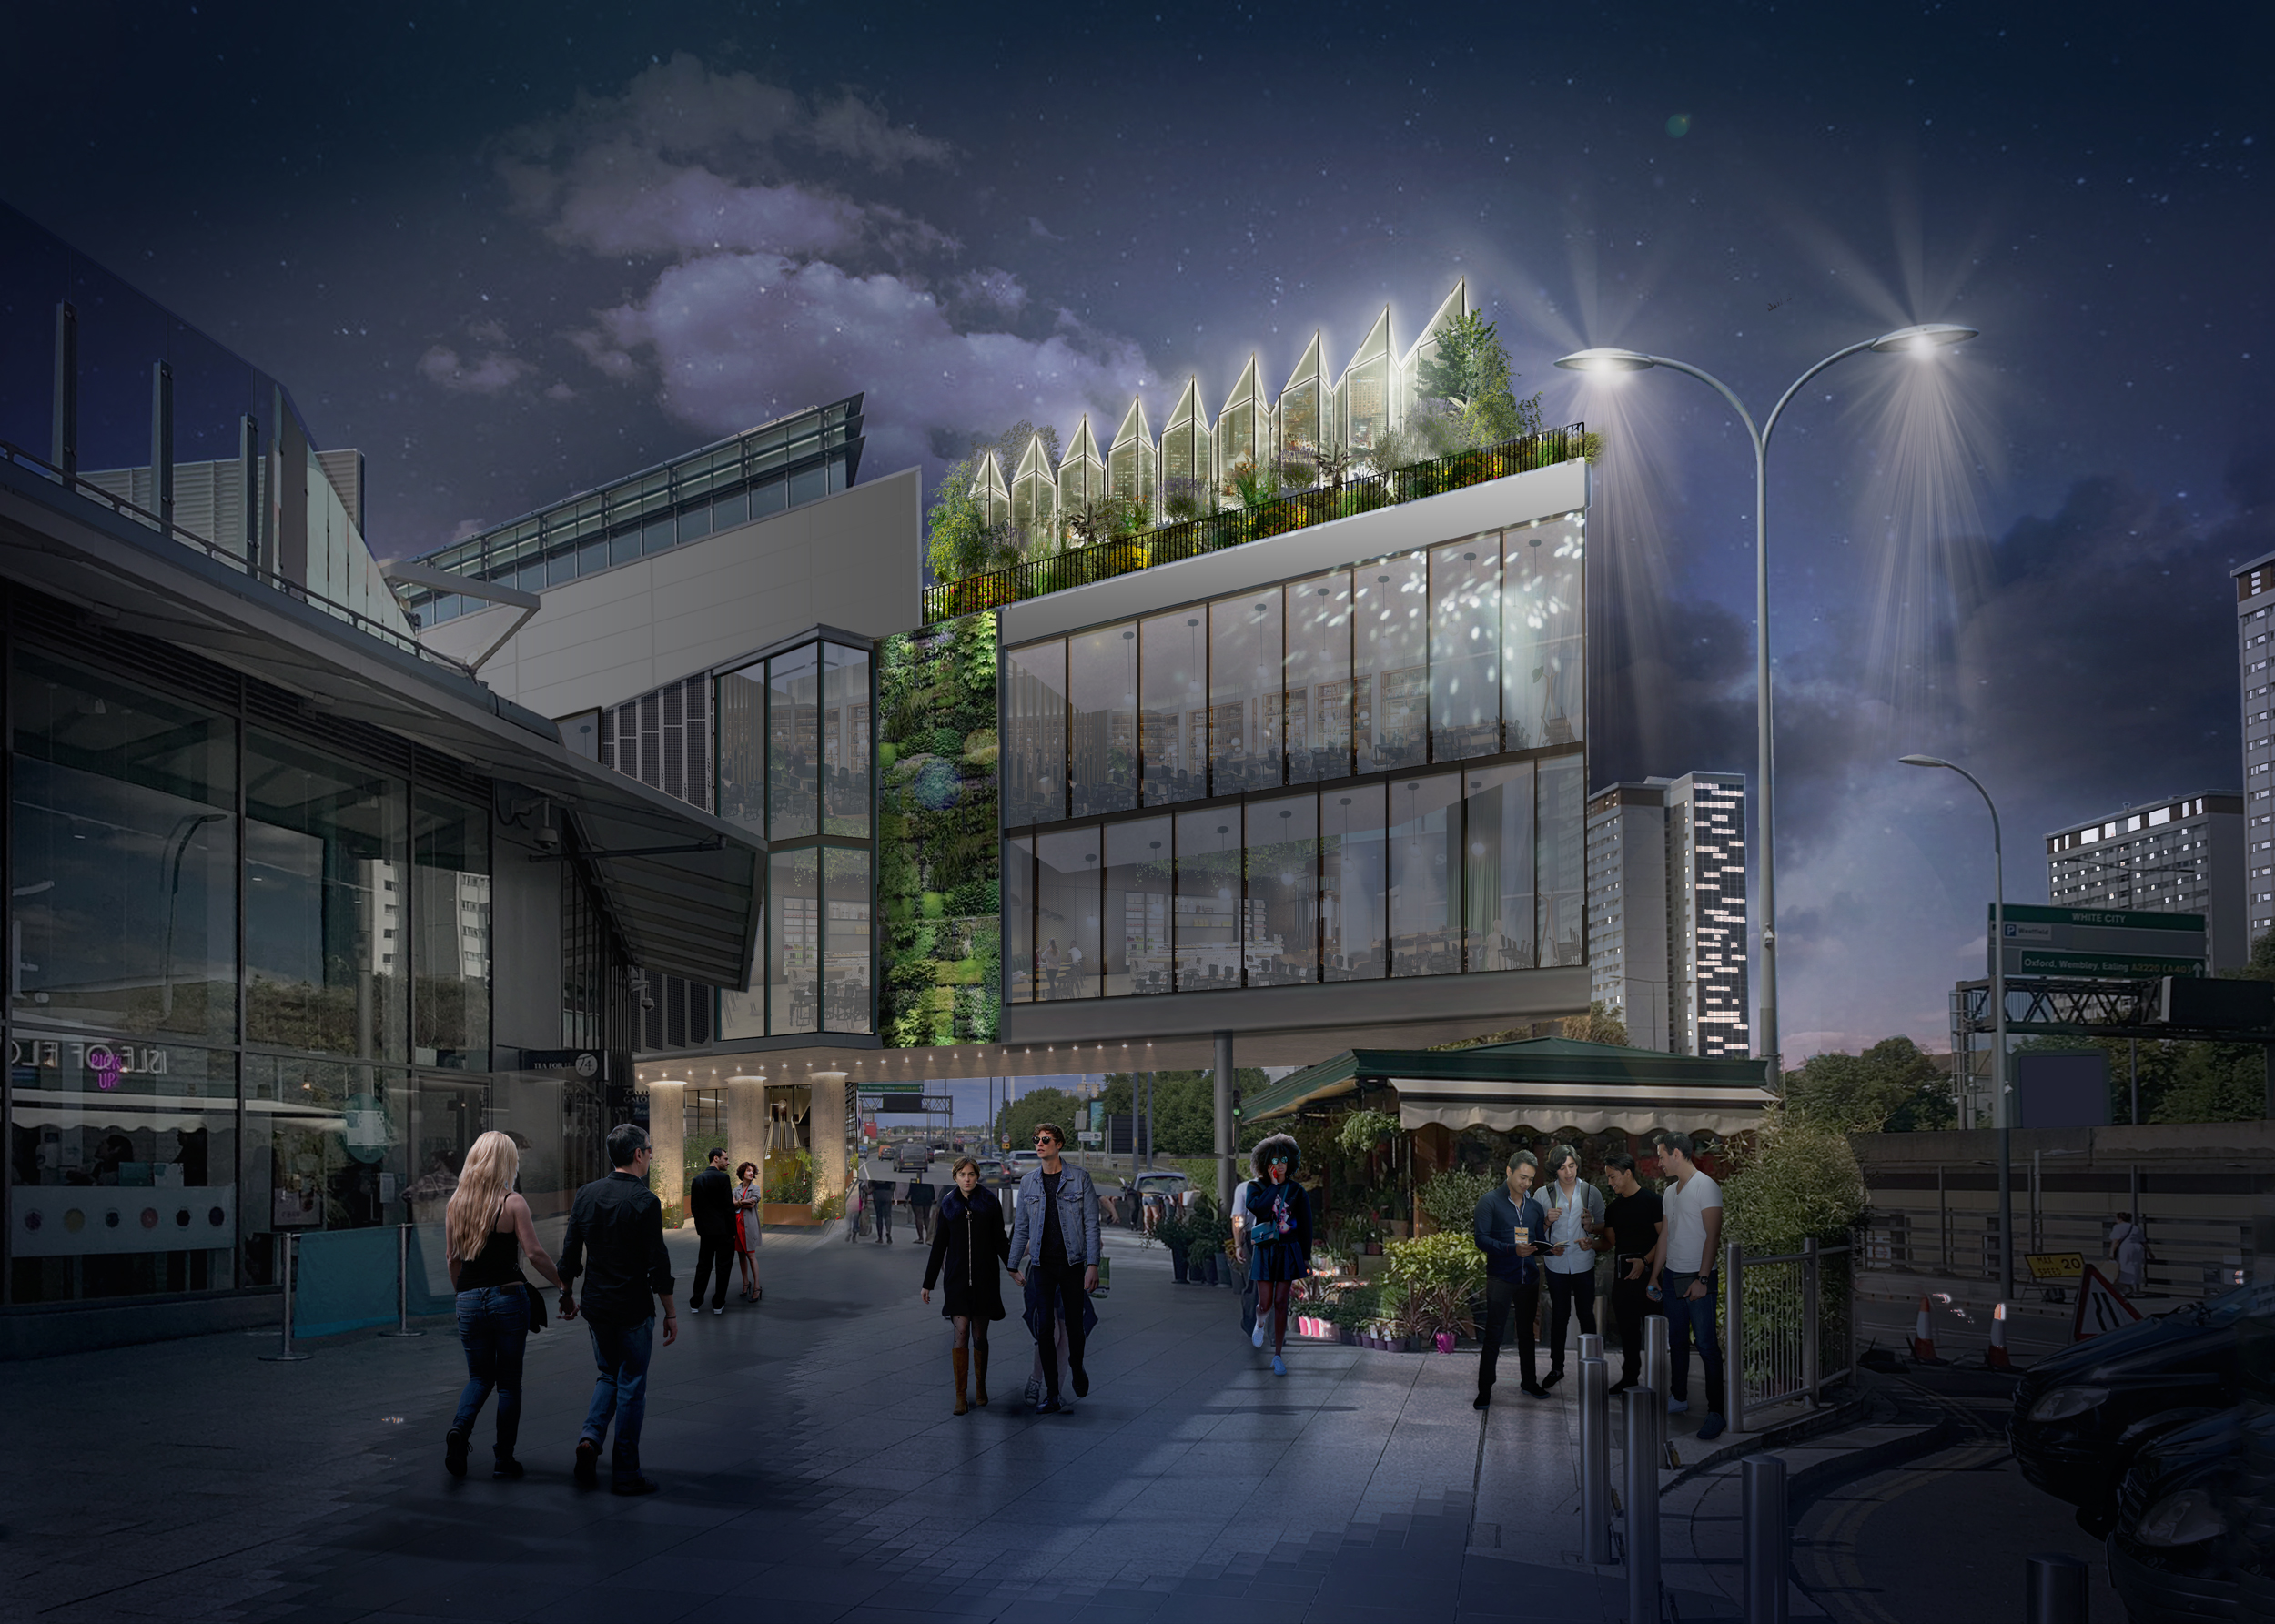 Introducing The Ministry Shepherd's Bush at Westfield London